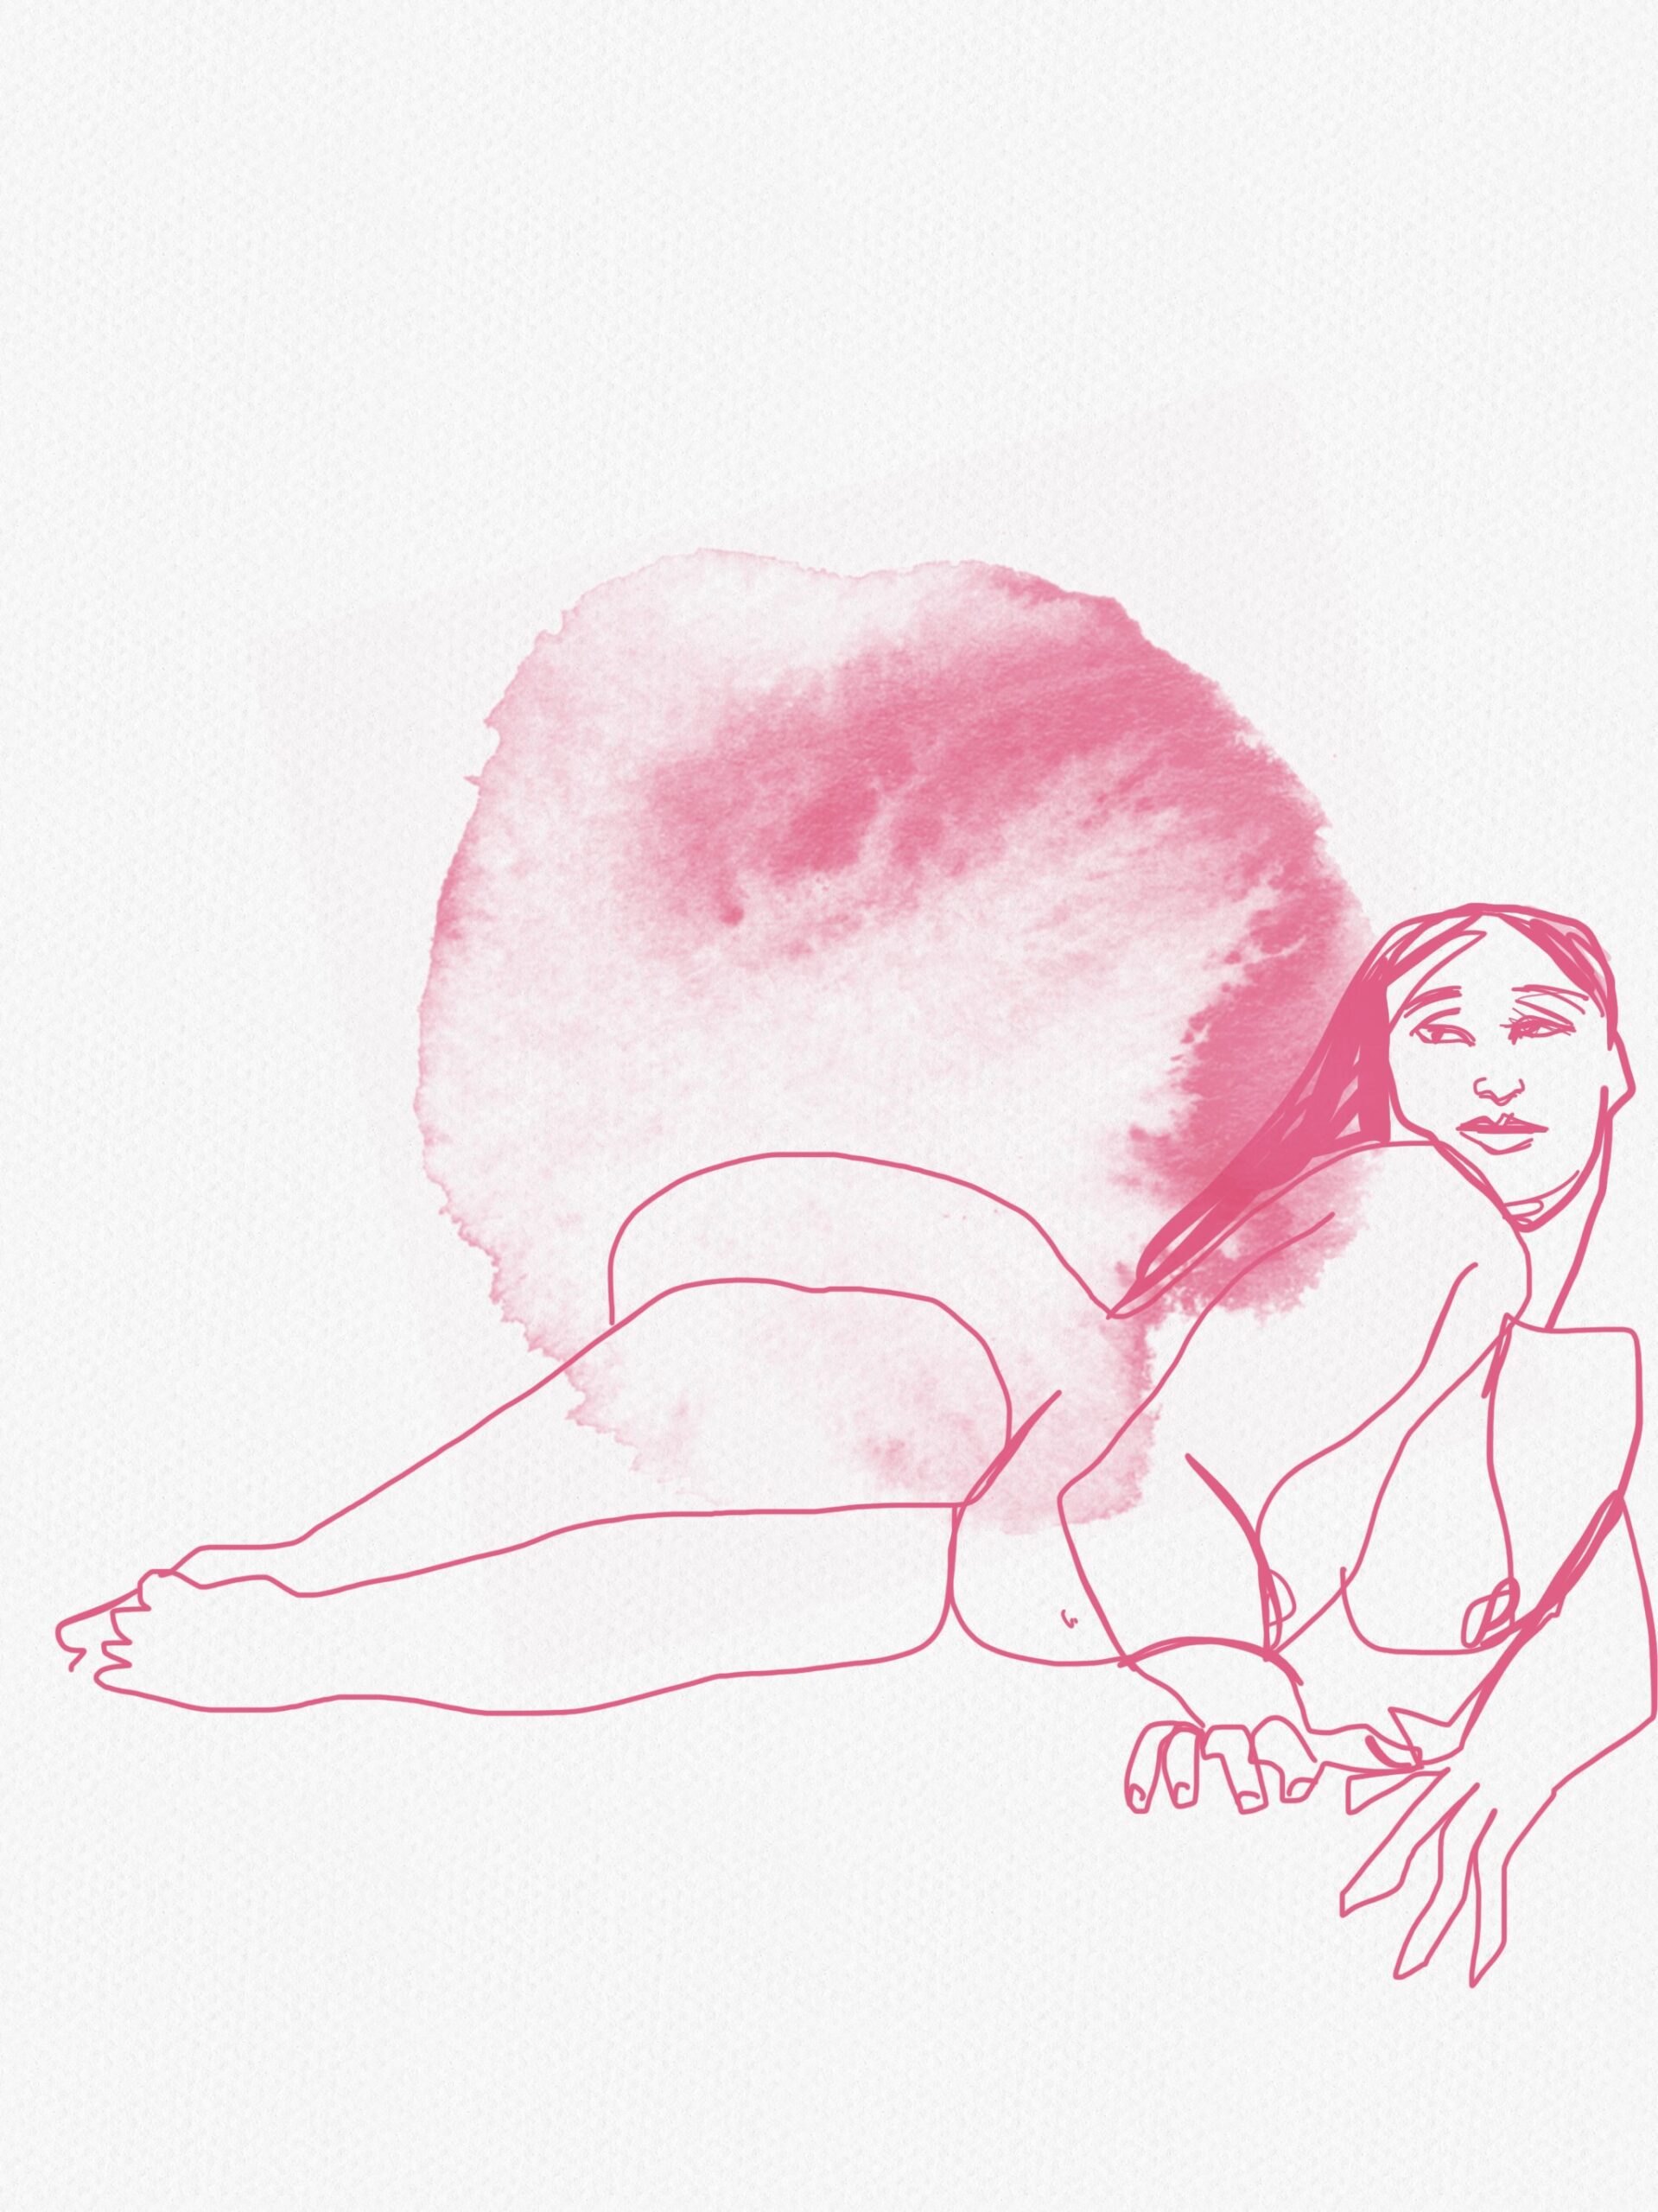 Nude model drawing, drawing and composition, Laura Volpintesta, digital drawing